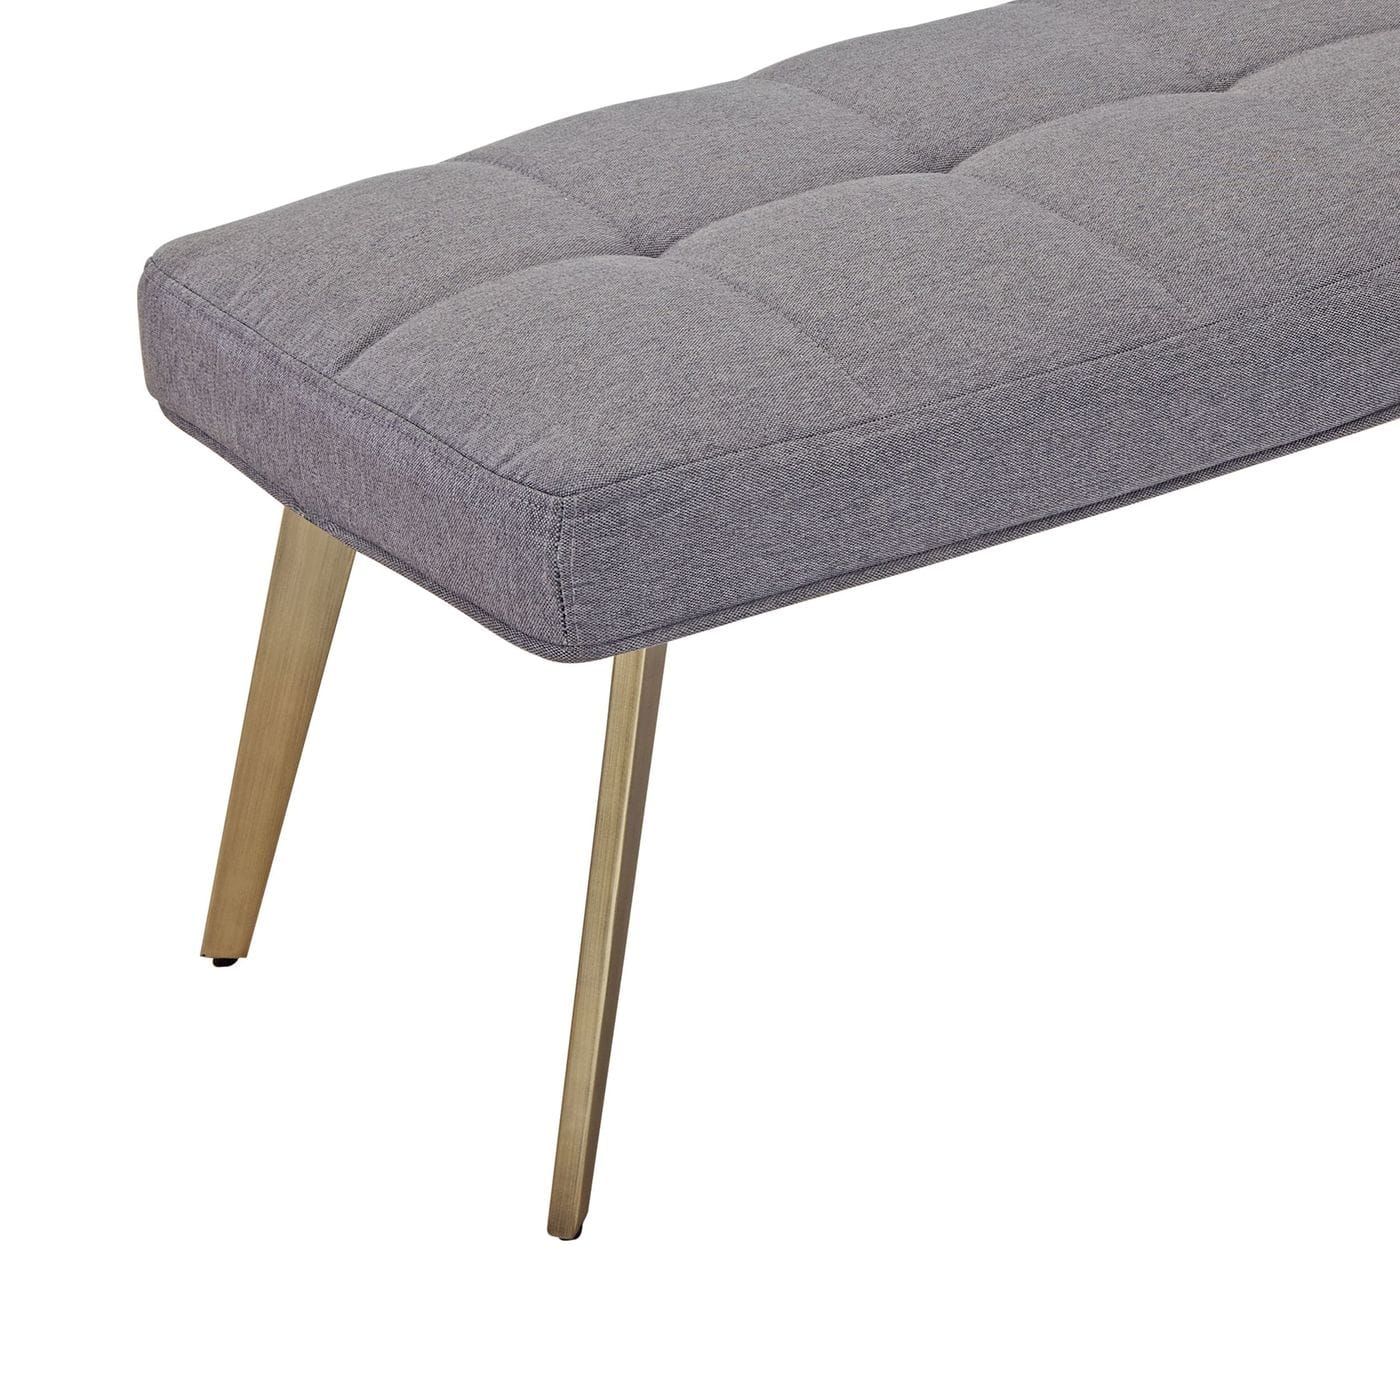 Modrest Cici - Contemporary Grey & Antique Brass Bench-Bench-VIG-Wall2Wall Furnishings